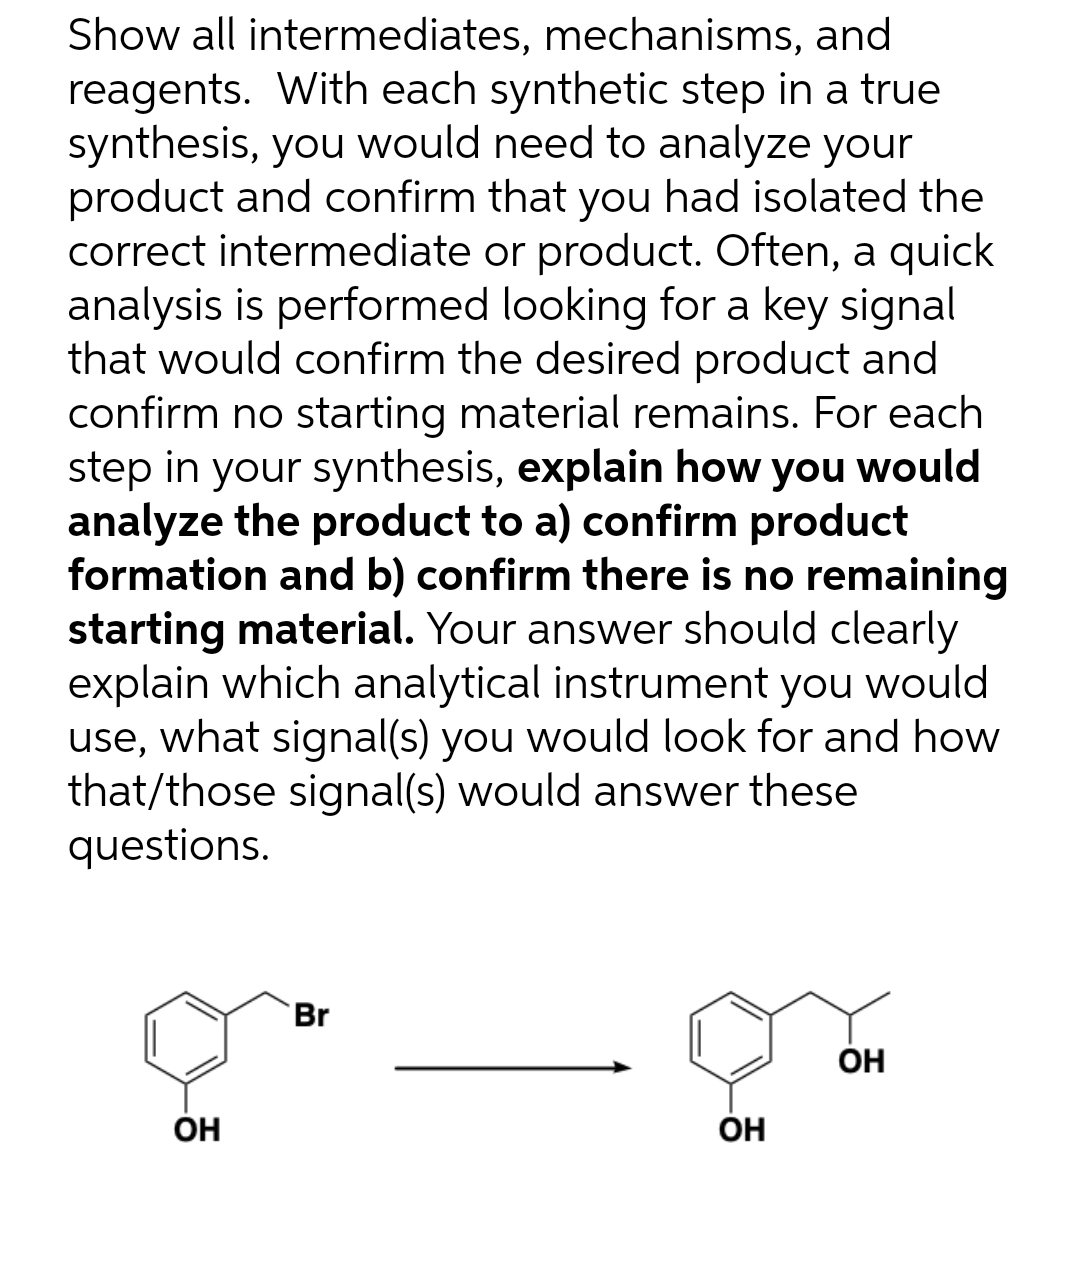 Show all intermediates, mechanisms, and
reagents. With each synthetic step in a true
synthesis, you would need to analyze your
product and confirm that you had isolated the
correct intermediate or product. Often, a quick
analysis is performed looking for a key signal
that would confirm the desired product and
confirm no starting material remains. For each
step in your synthesis, explain how you would
analyze the product to a) confirm product
formation and b) confirm there is no remaining
starting material. Your answer should clearly
explain which analytical instrument you would
use, what signal(s) you would look for and how
that/those signal(s) would answer these
questions.
Br
OH
OH
OH